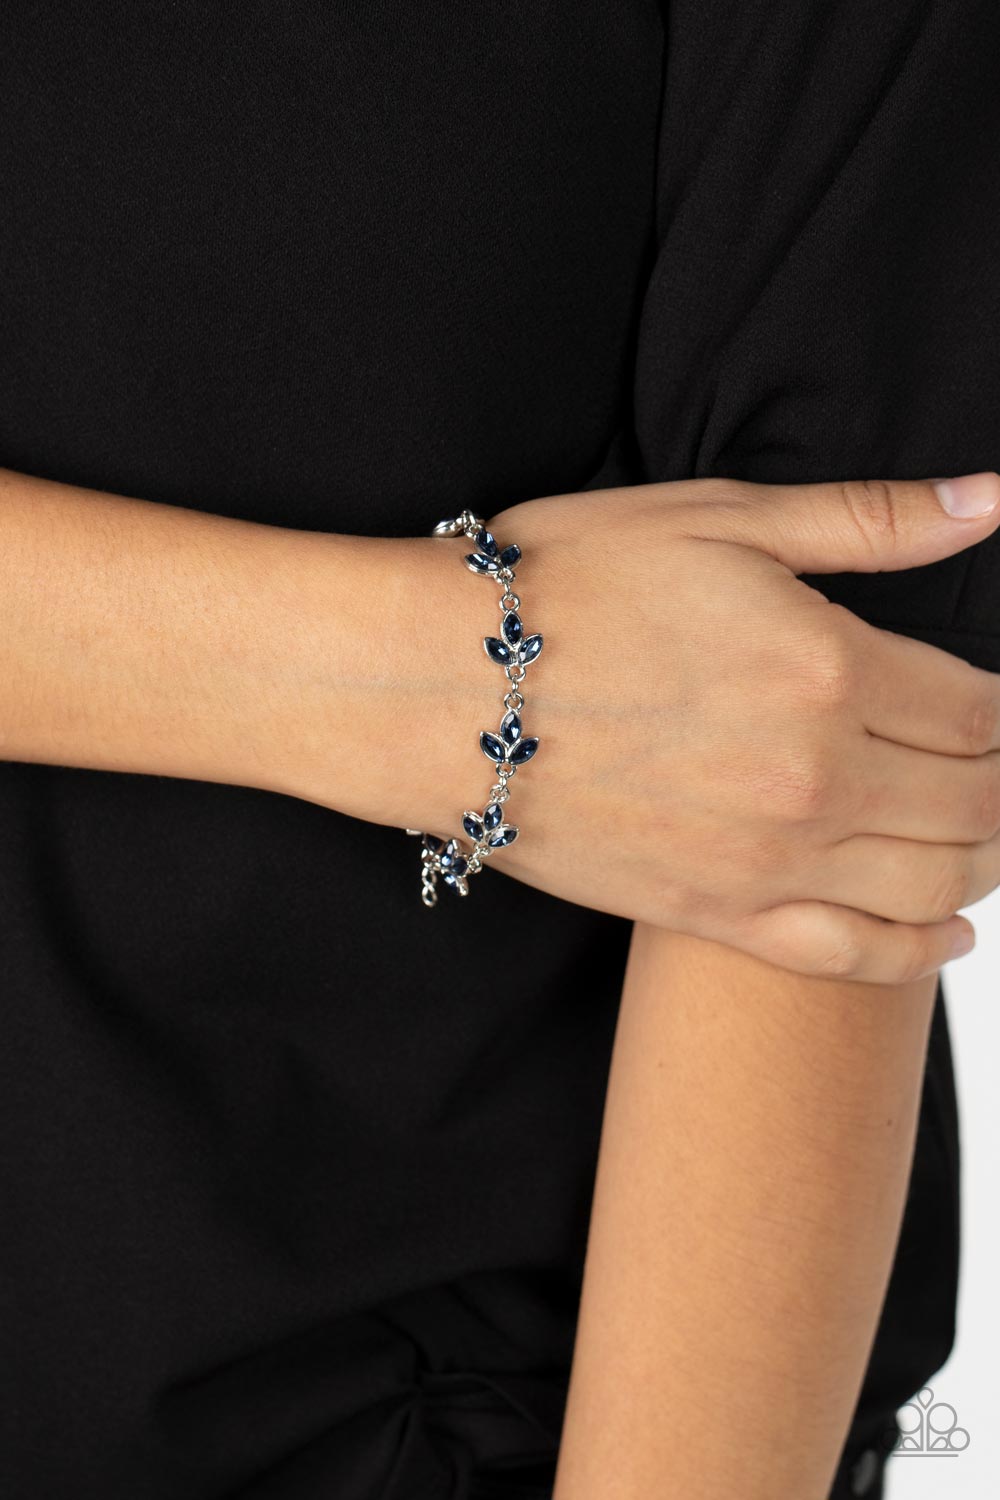 Gala Garland- Blue and Silver Bracelet- Paparazzi Accessories